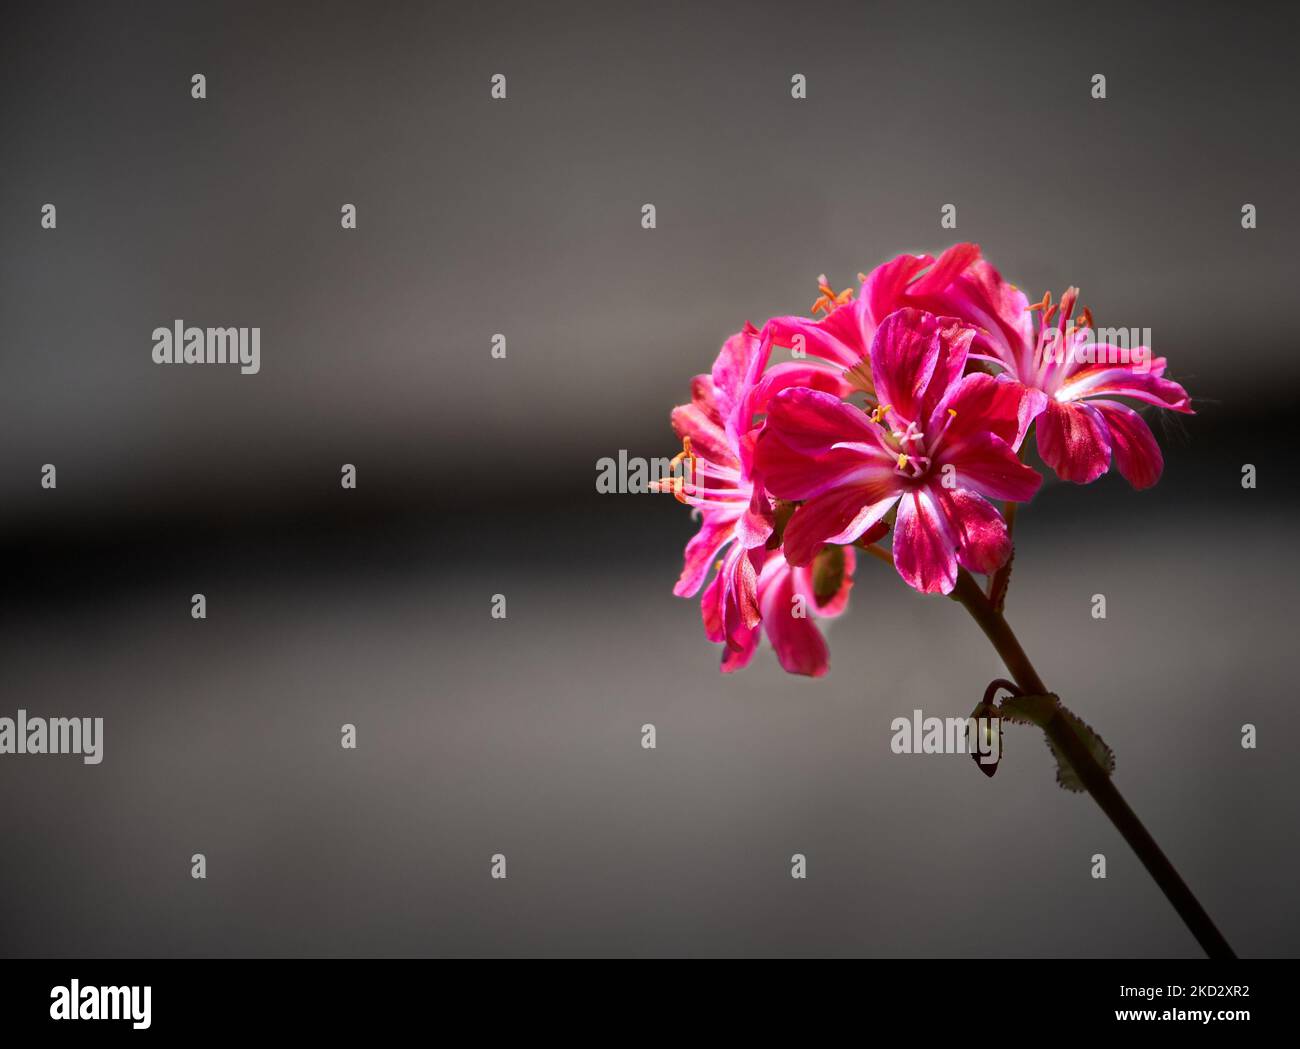 The macro view of Siskiyou lewisia plant flowers before the gray background Stock Photo